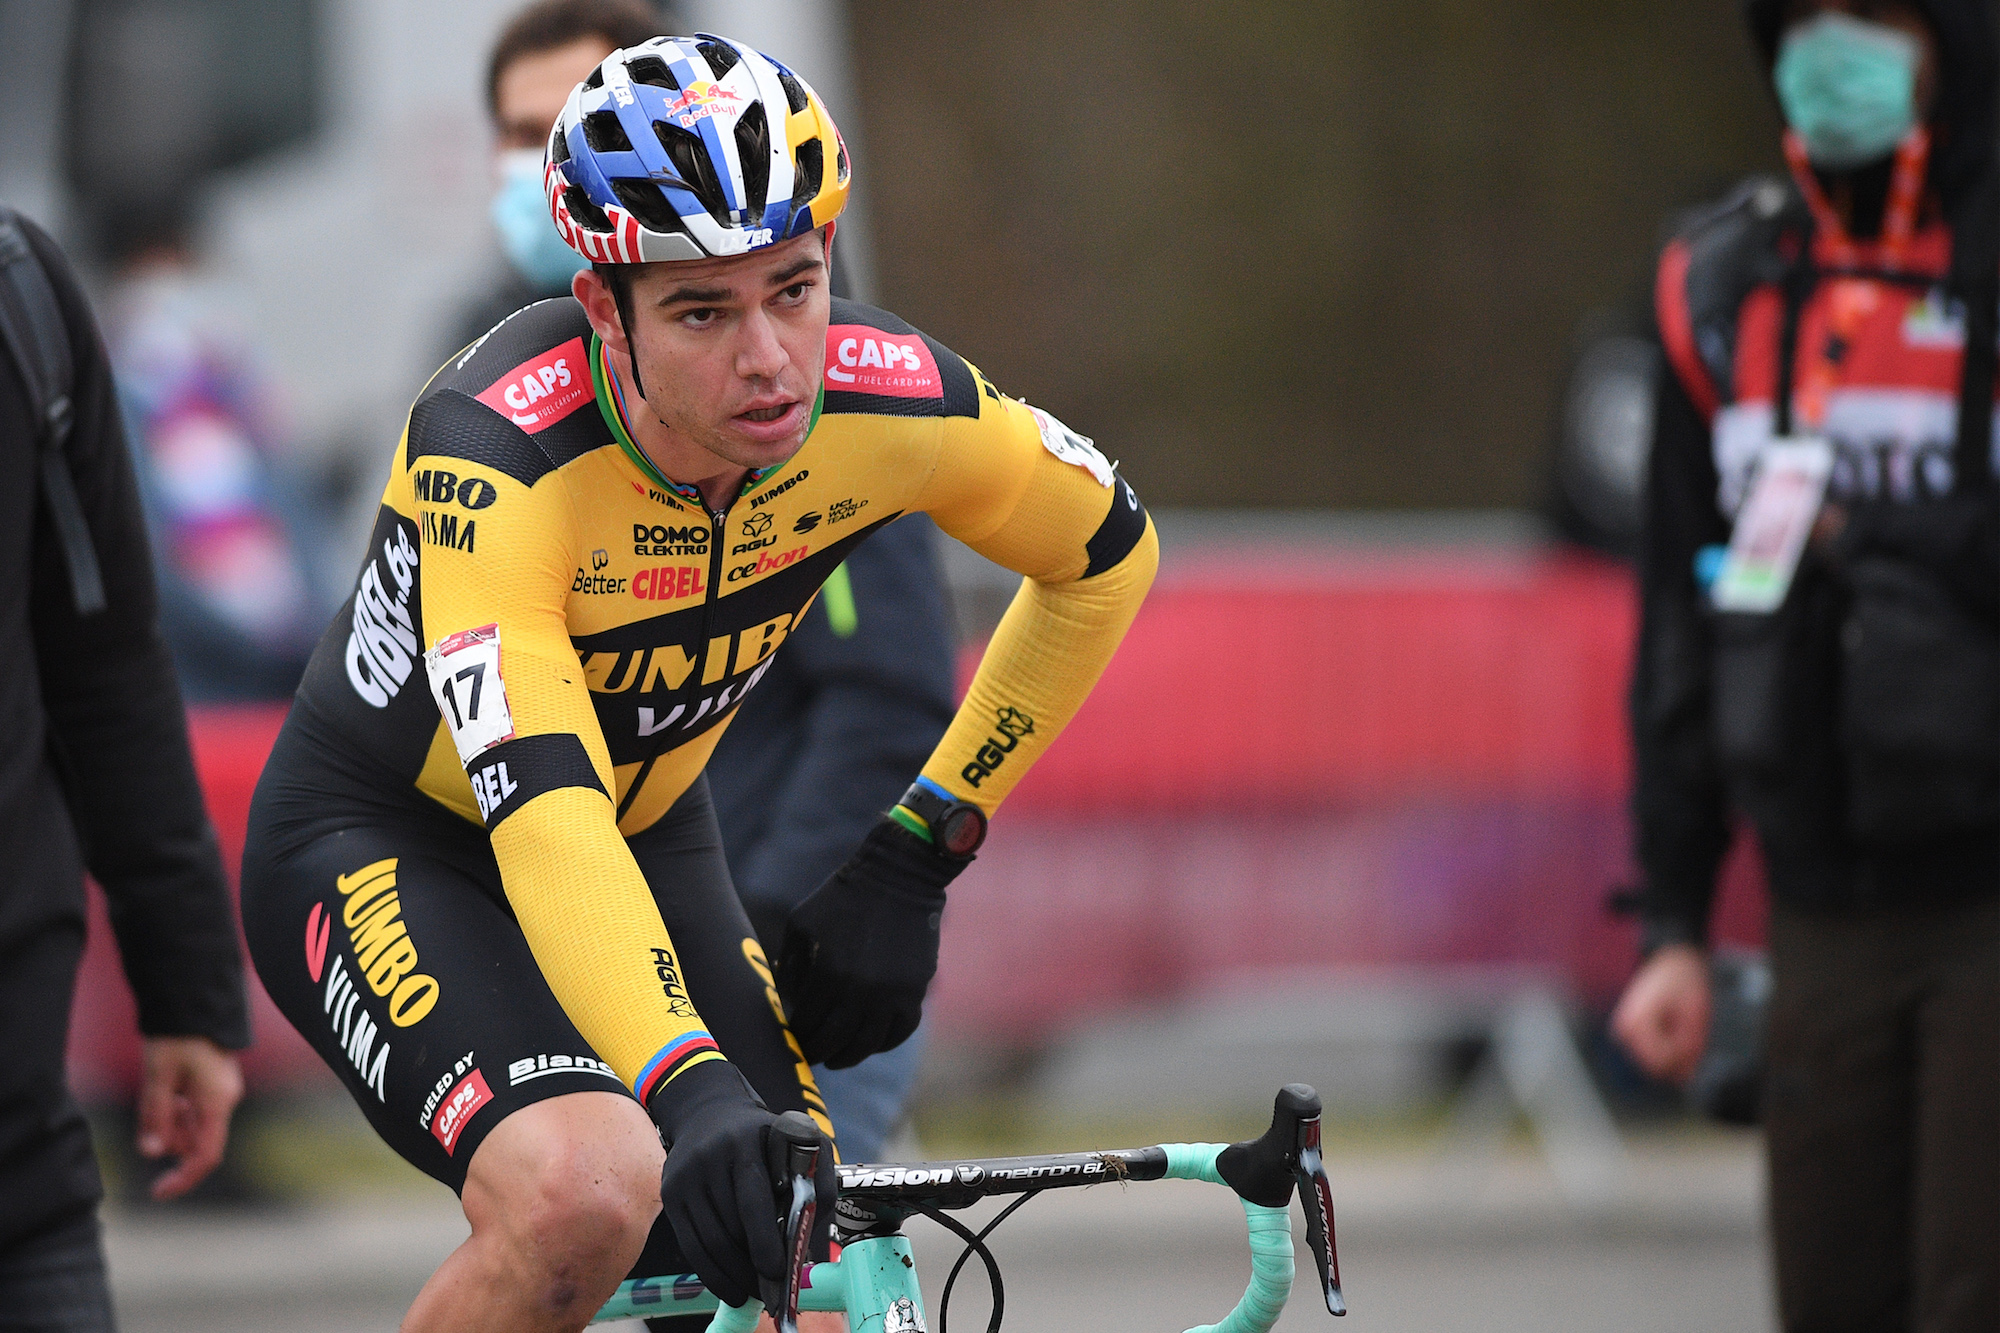 Ineos Grenadiers join race to sign Wout van Aert in 2022, according to